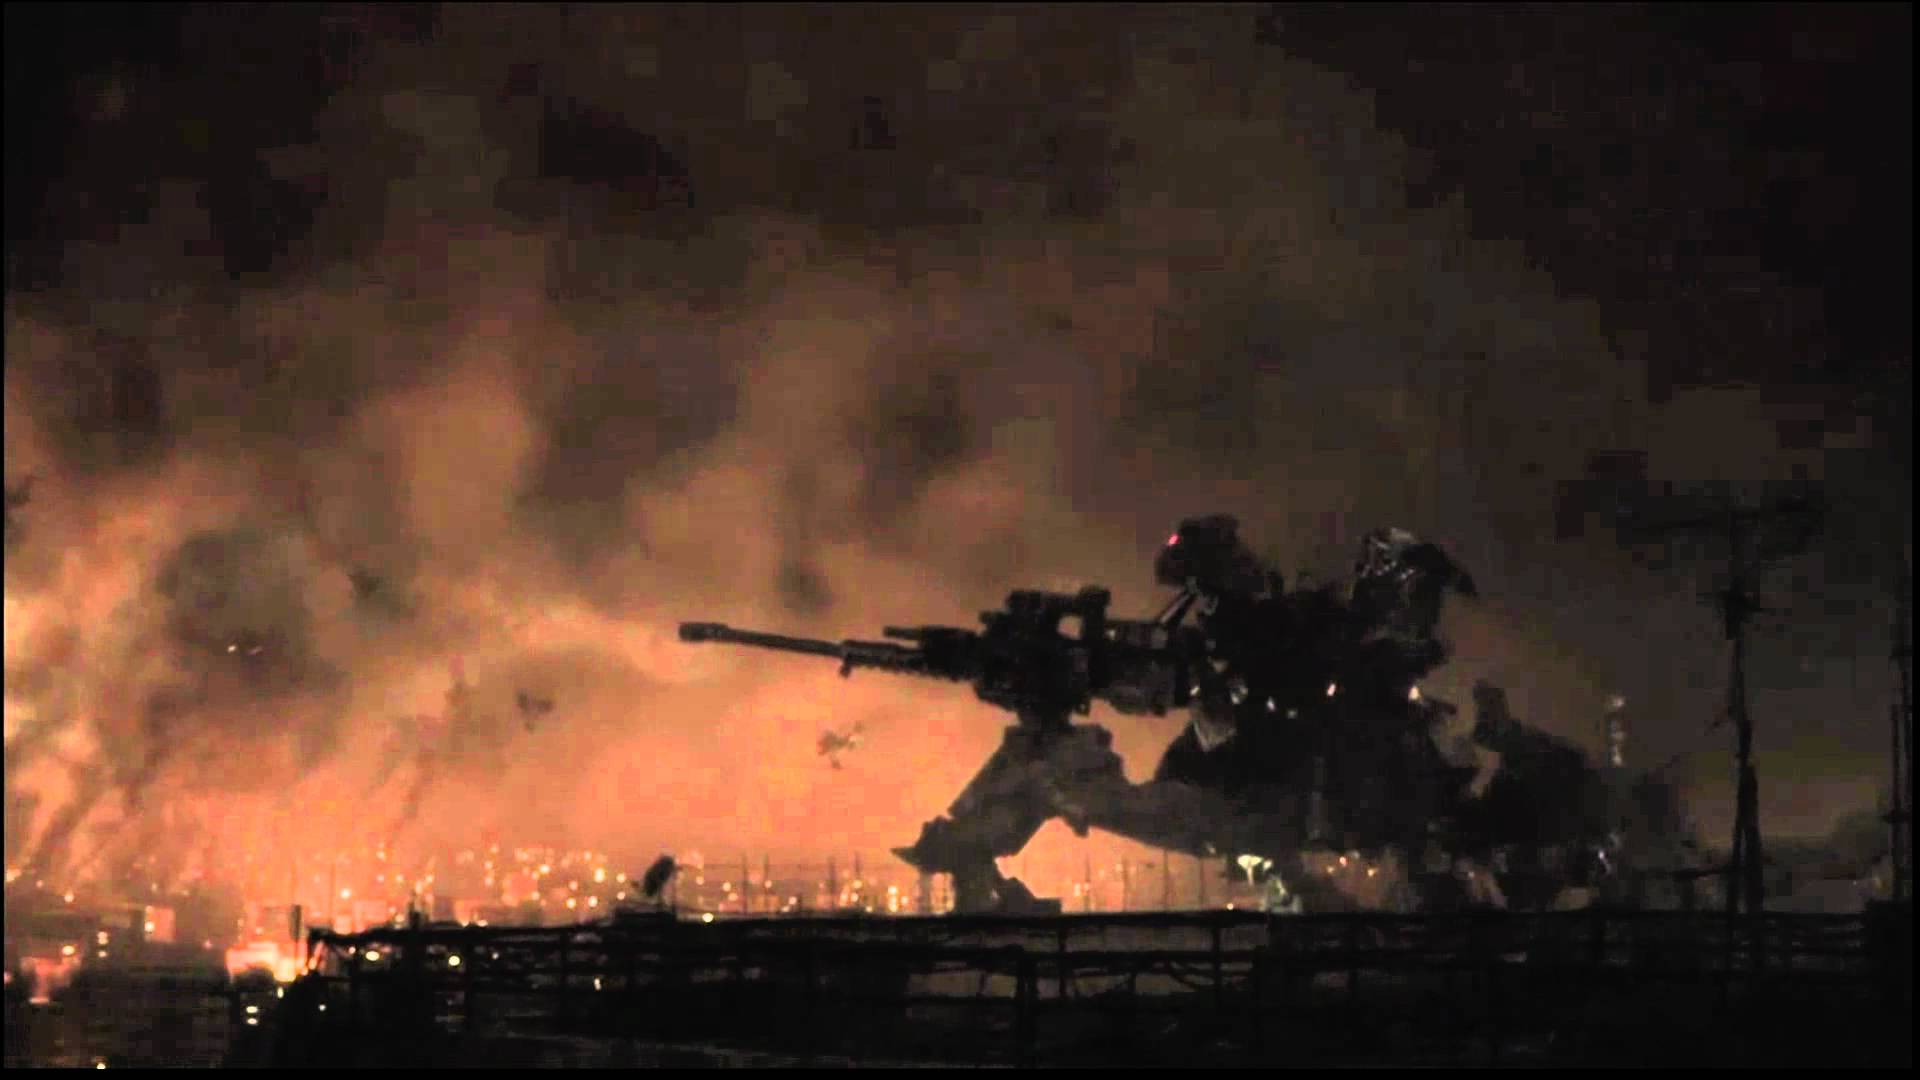 ARMORED CORE 5 CG trailler (full version) - YouTube